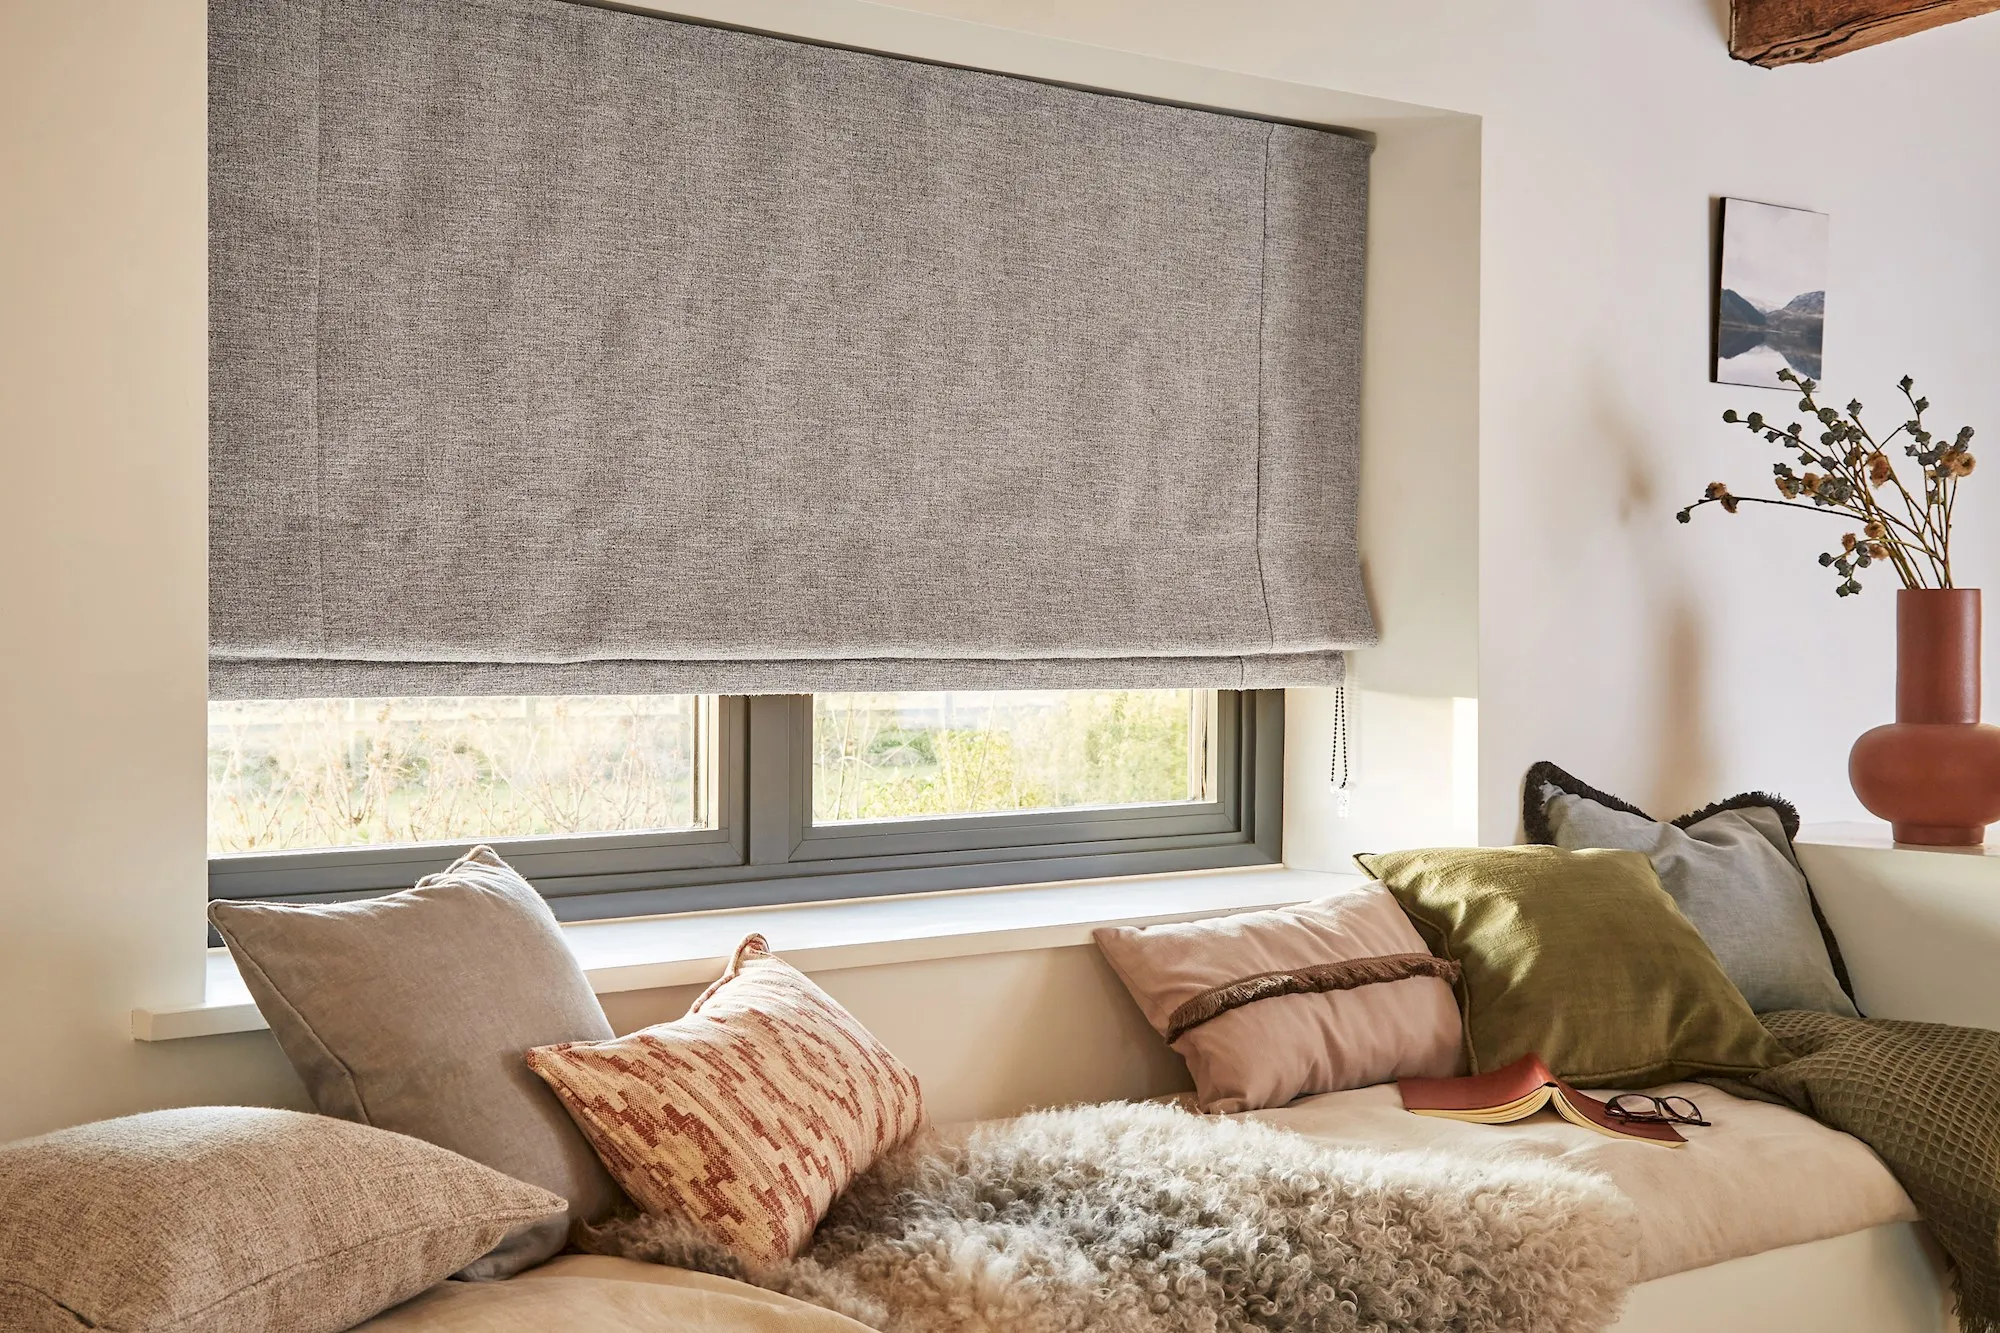 Revive Your Window: Make Your Roman Blinds Shine Now!